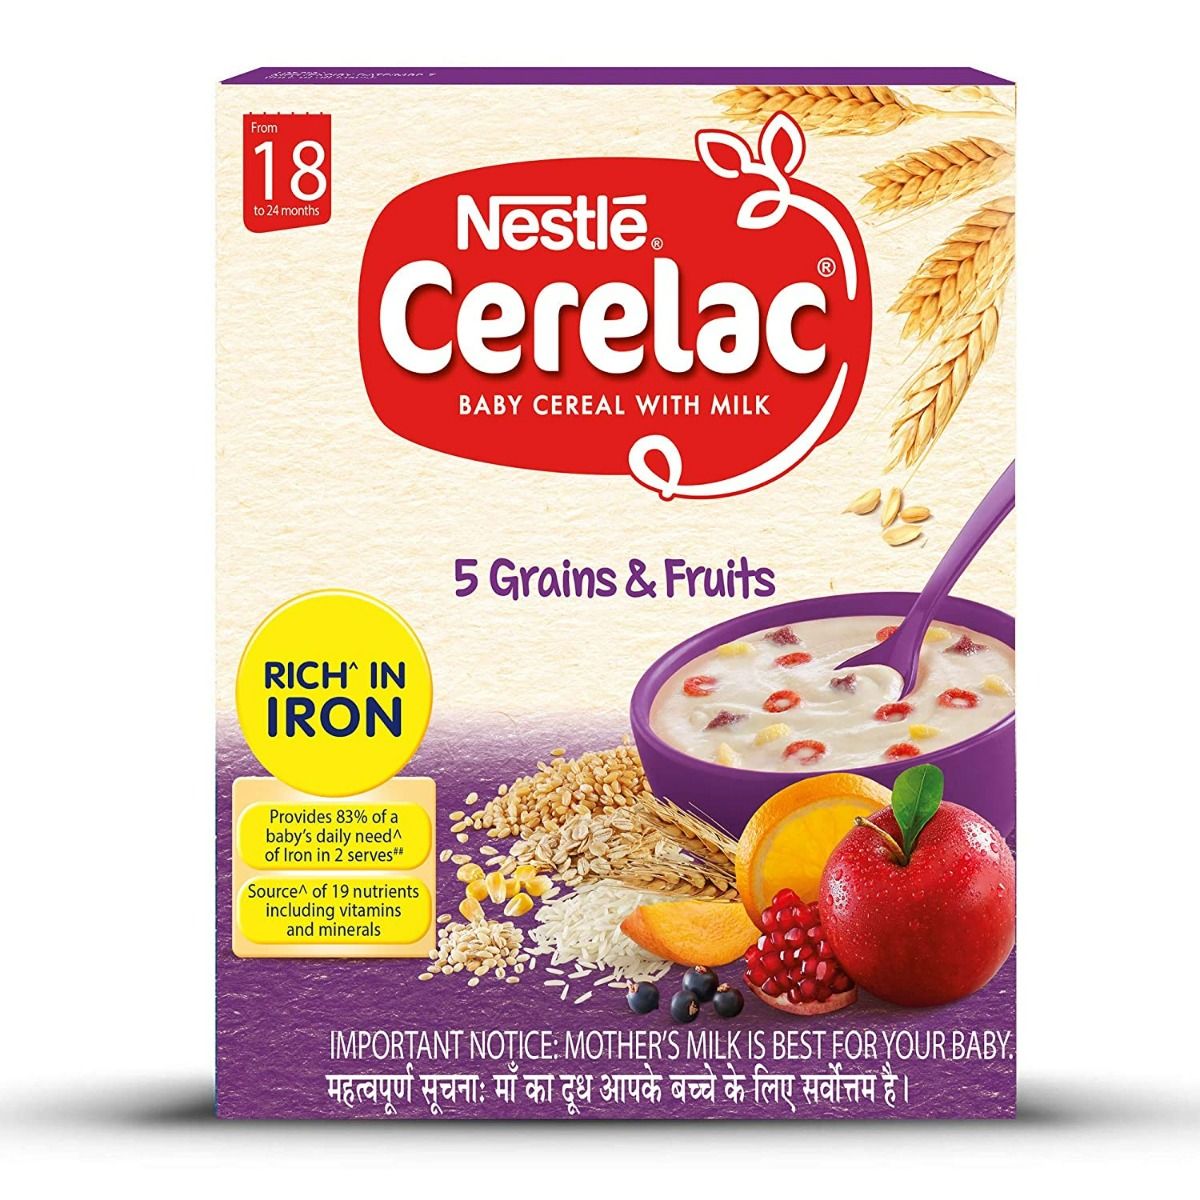 Buy Nestle Cerelac 5 Grains & Fruits Baby Cereal, 18 to 24months, 300 gm Refill Pack Online